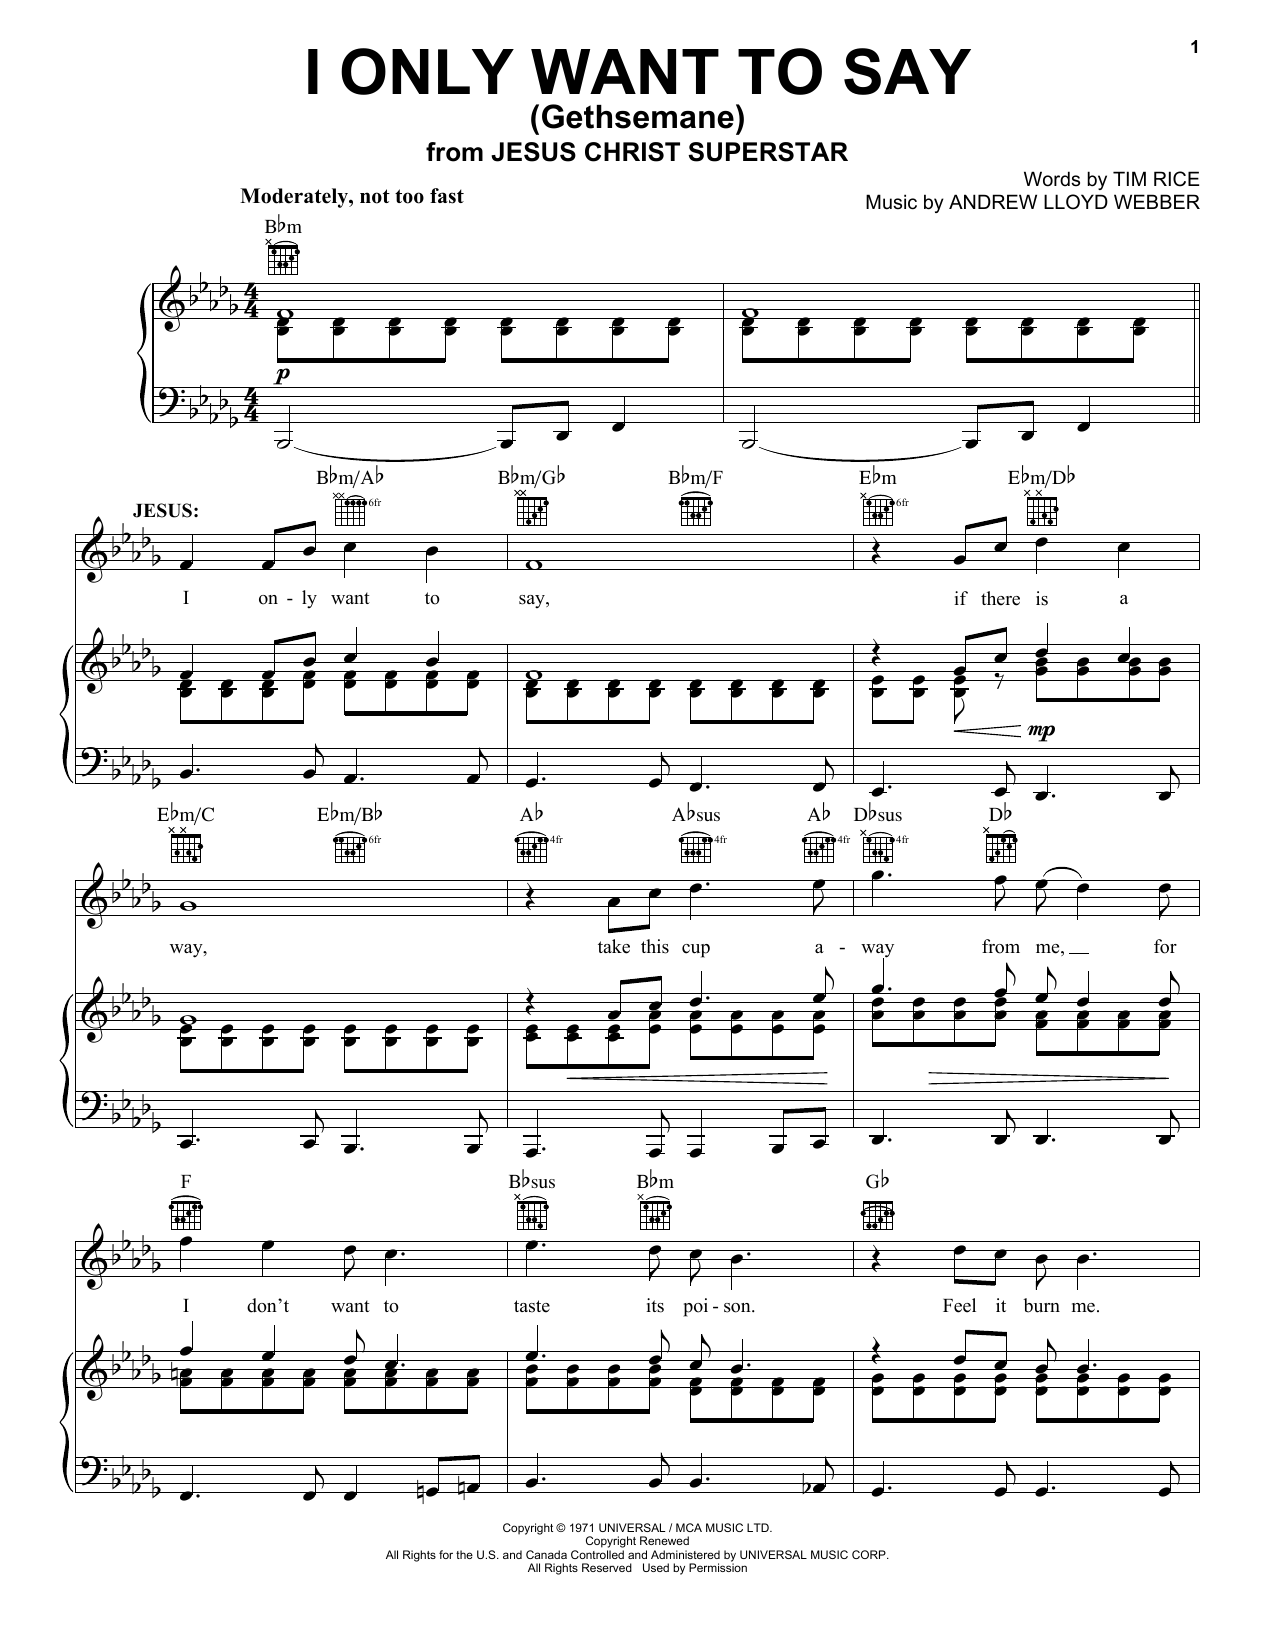 Andrew Lloyd Webber I Only Want To Say (Gethsemane) sheet music notes printable PDF score